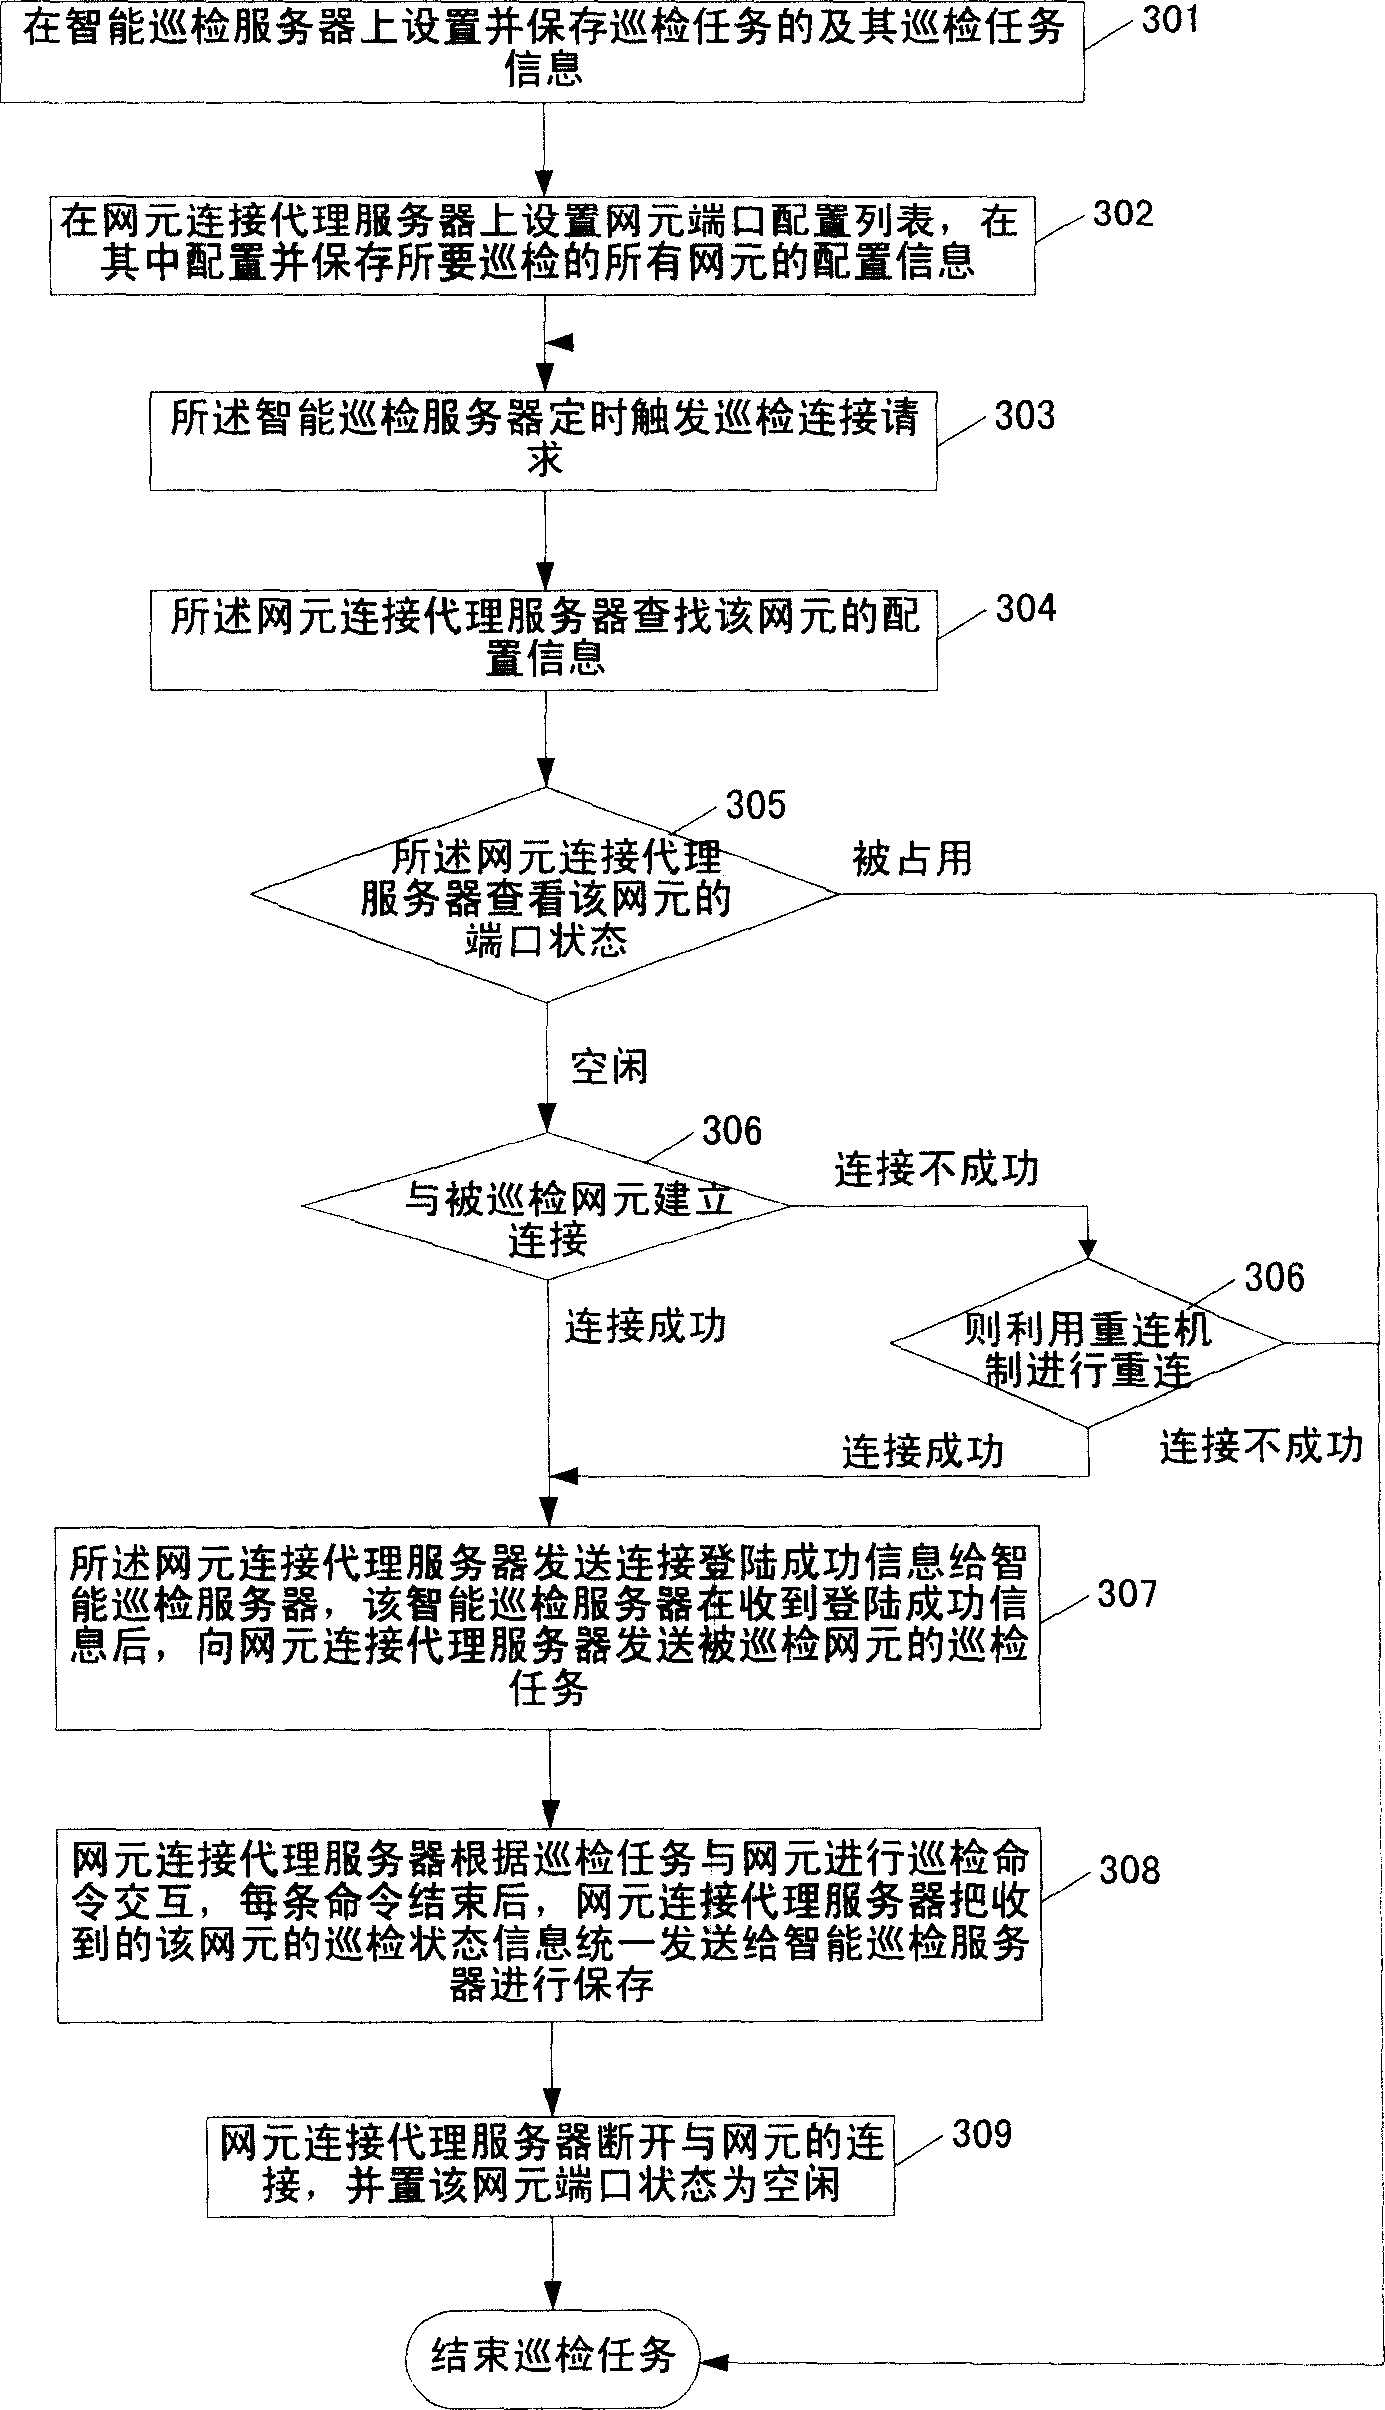 Method and equipment of intelligent patrol detection for communication network